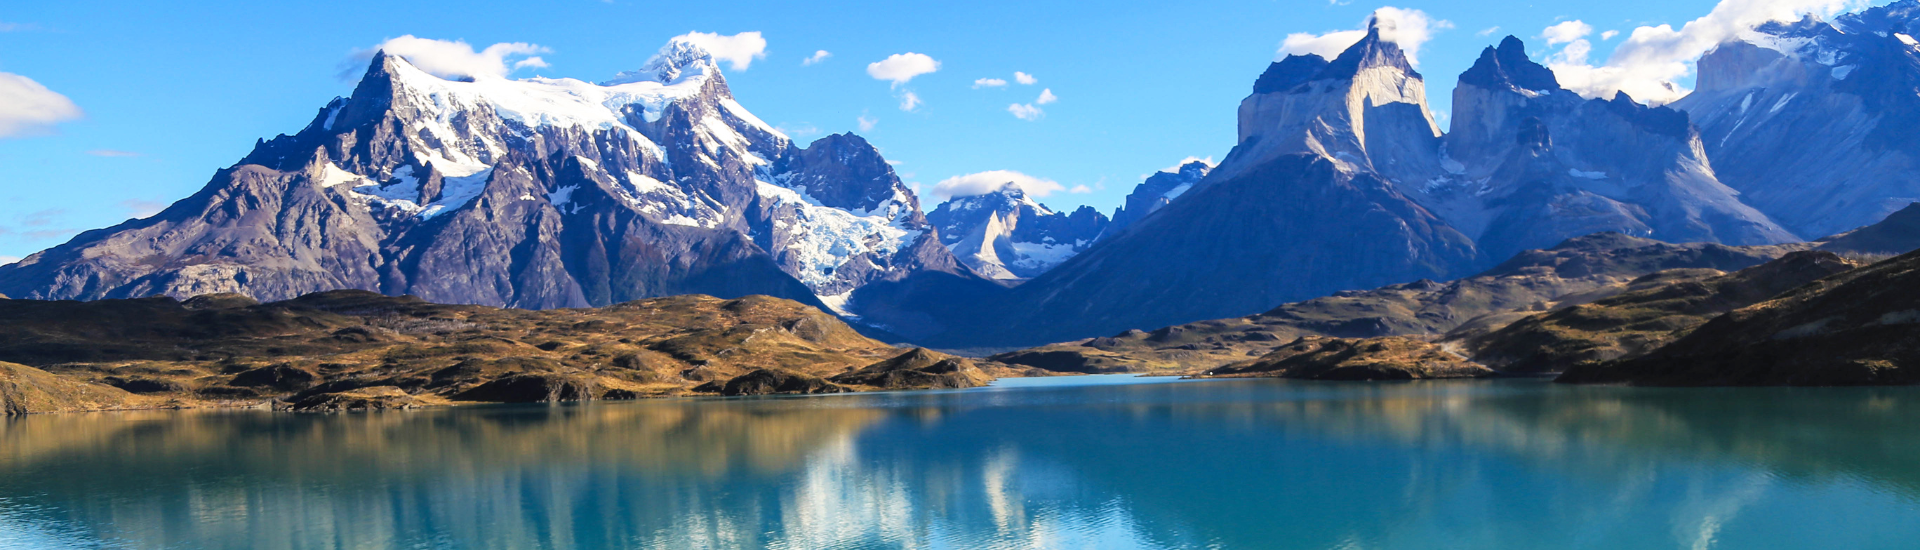 Adventure Awaits in Patagonia's Dramatic Landscapes.